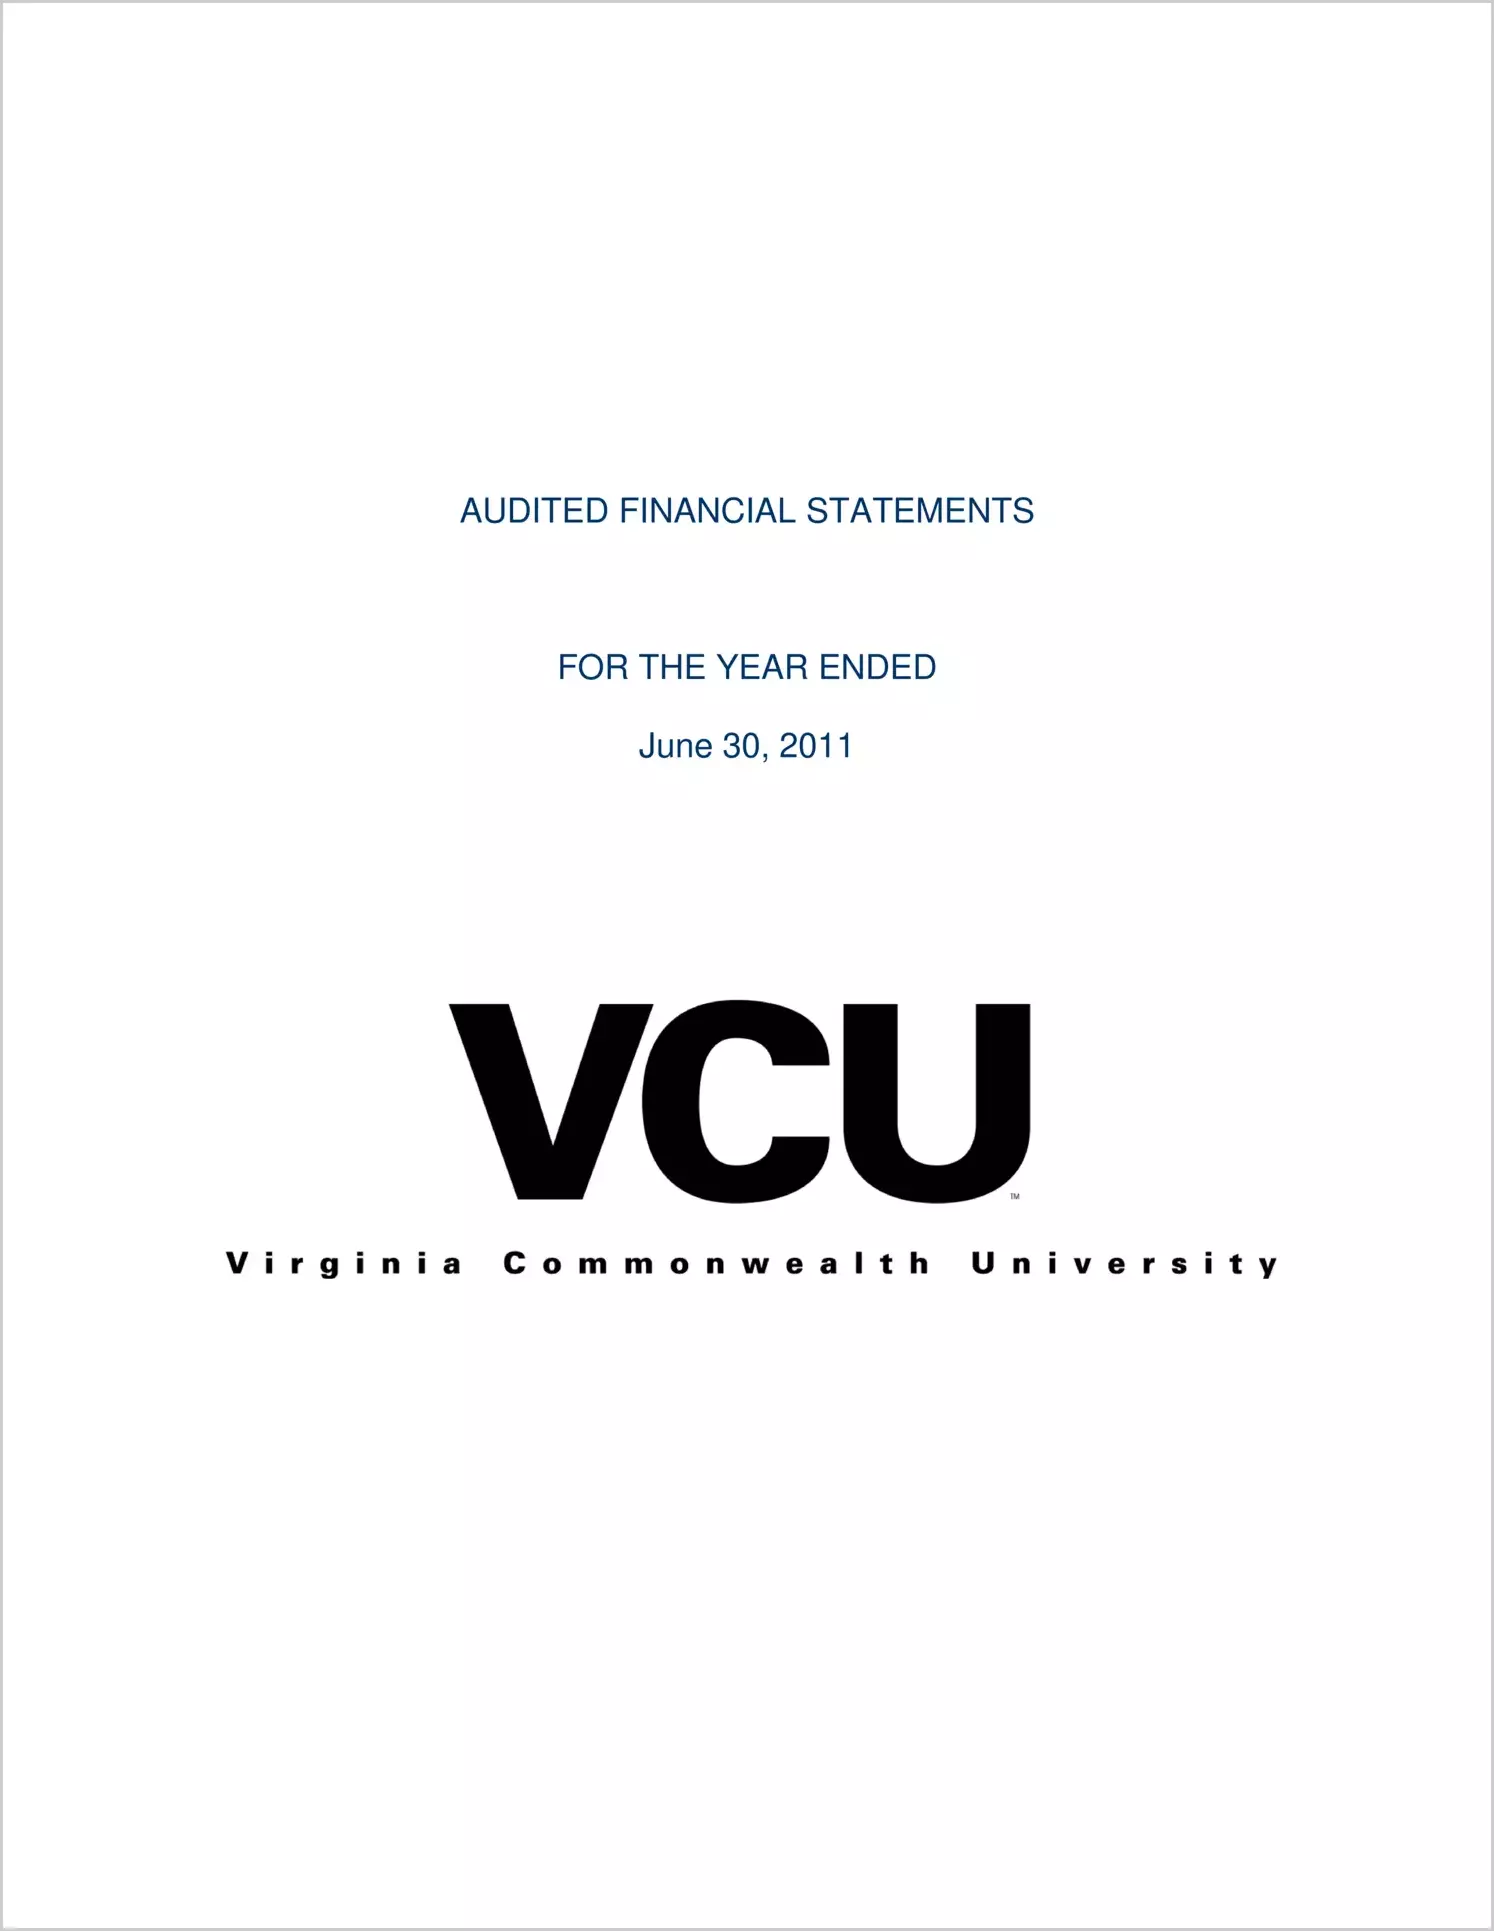 Virginia Commonwealth University Finanical Statements Report for the year ended June 30, 2011